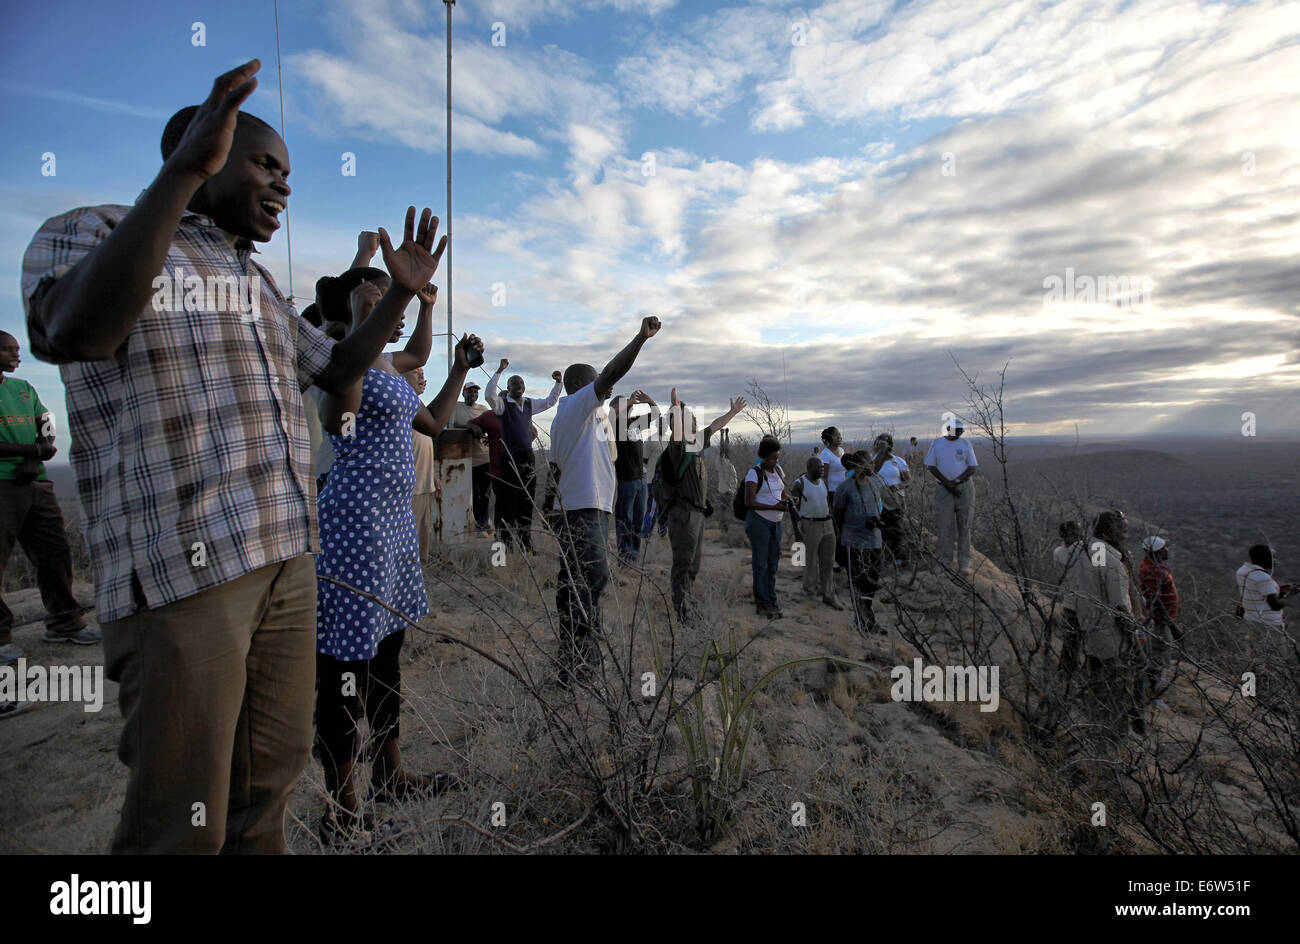 (140831) -- KORA NATIONAL PARK, Aug. 31, 2014 (Xinhua) -- Wildlife conservationists from different countries climb the Kora Rock which was frequented by George Adamson in Kora National Park, in Kenya, Aug. 30, 2014. People gathered here to commemorate the 25th anniversary of the death of George Adamson on Saturday. George Adamson, also known as 'Father of Lions', was a British wildlife conservationist who took care of orphaned lions and later released them to the wild. He and his wife are best known through the movie 'Born Free' and best-selling book with the same title. (Xinhua/Zhou Xiaoxiong Stock Photo